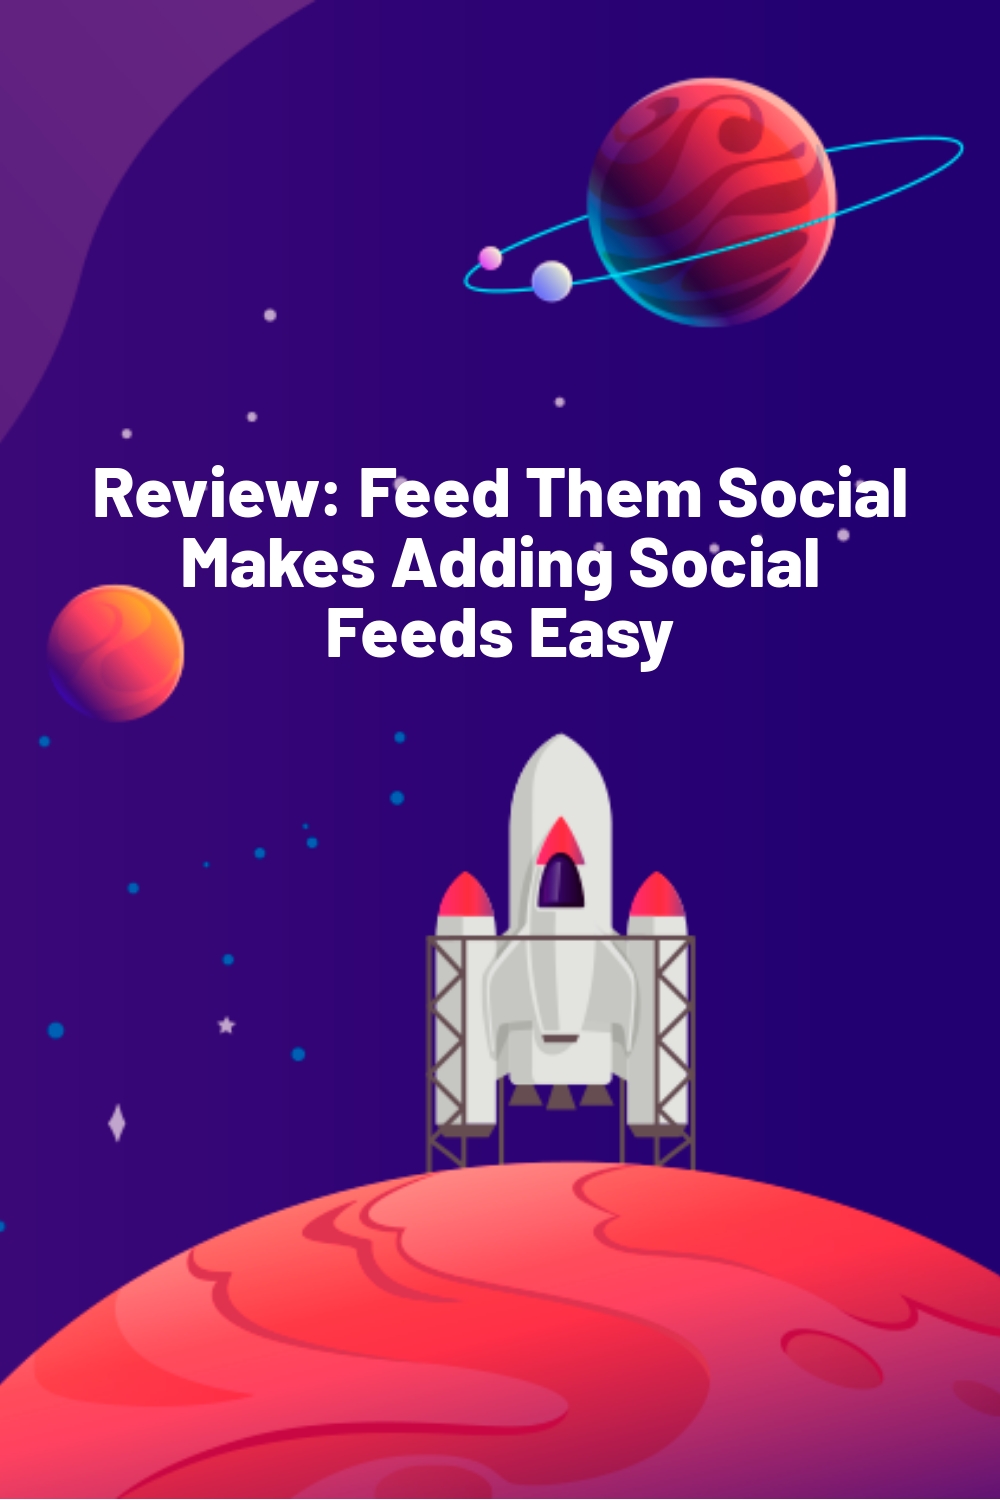 Review: Feed Them Social Makes Adding Social Feeds Easy